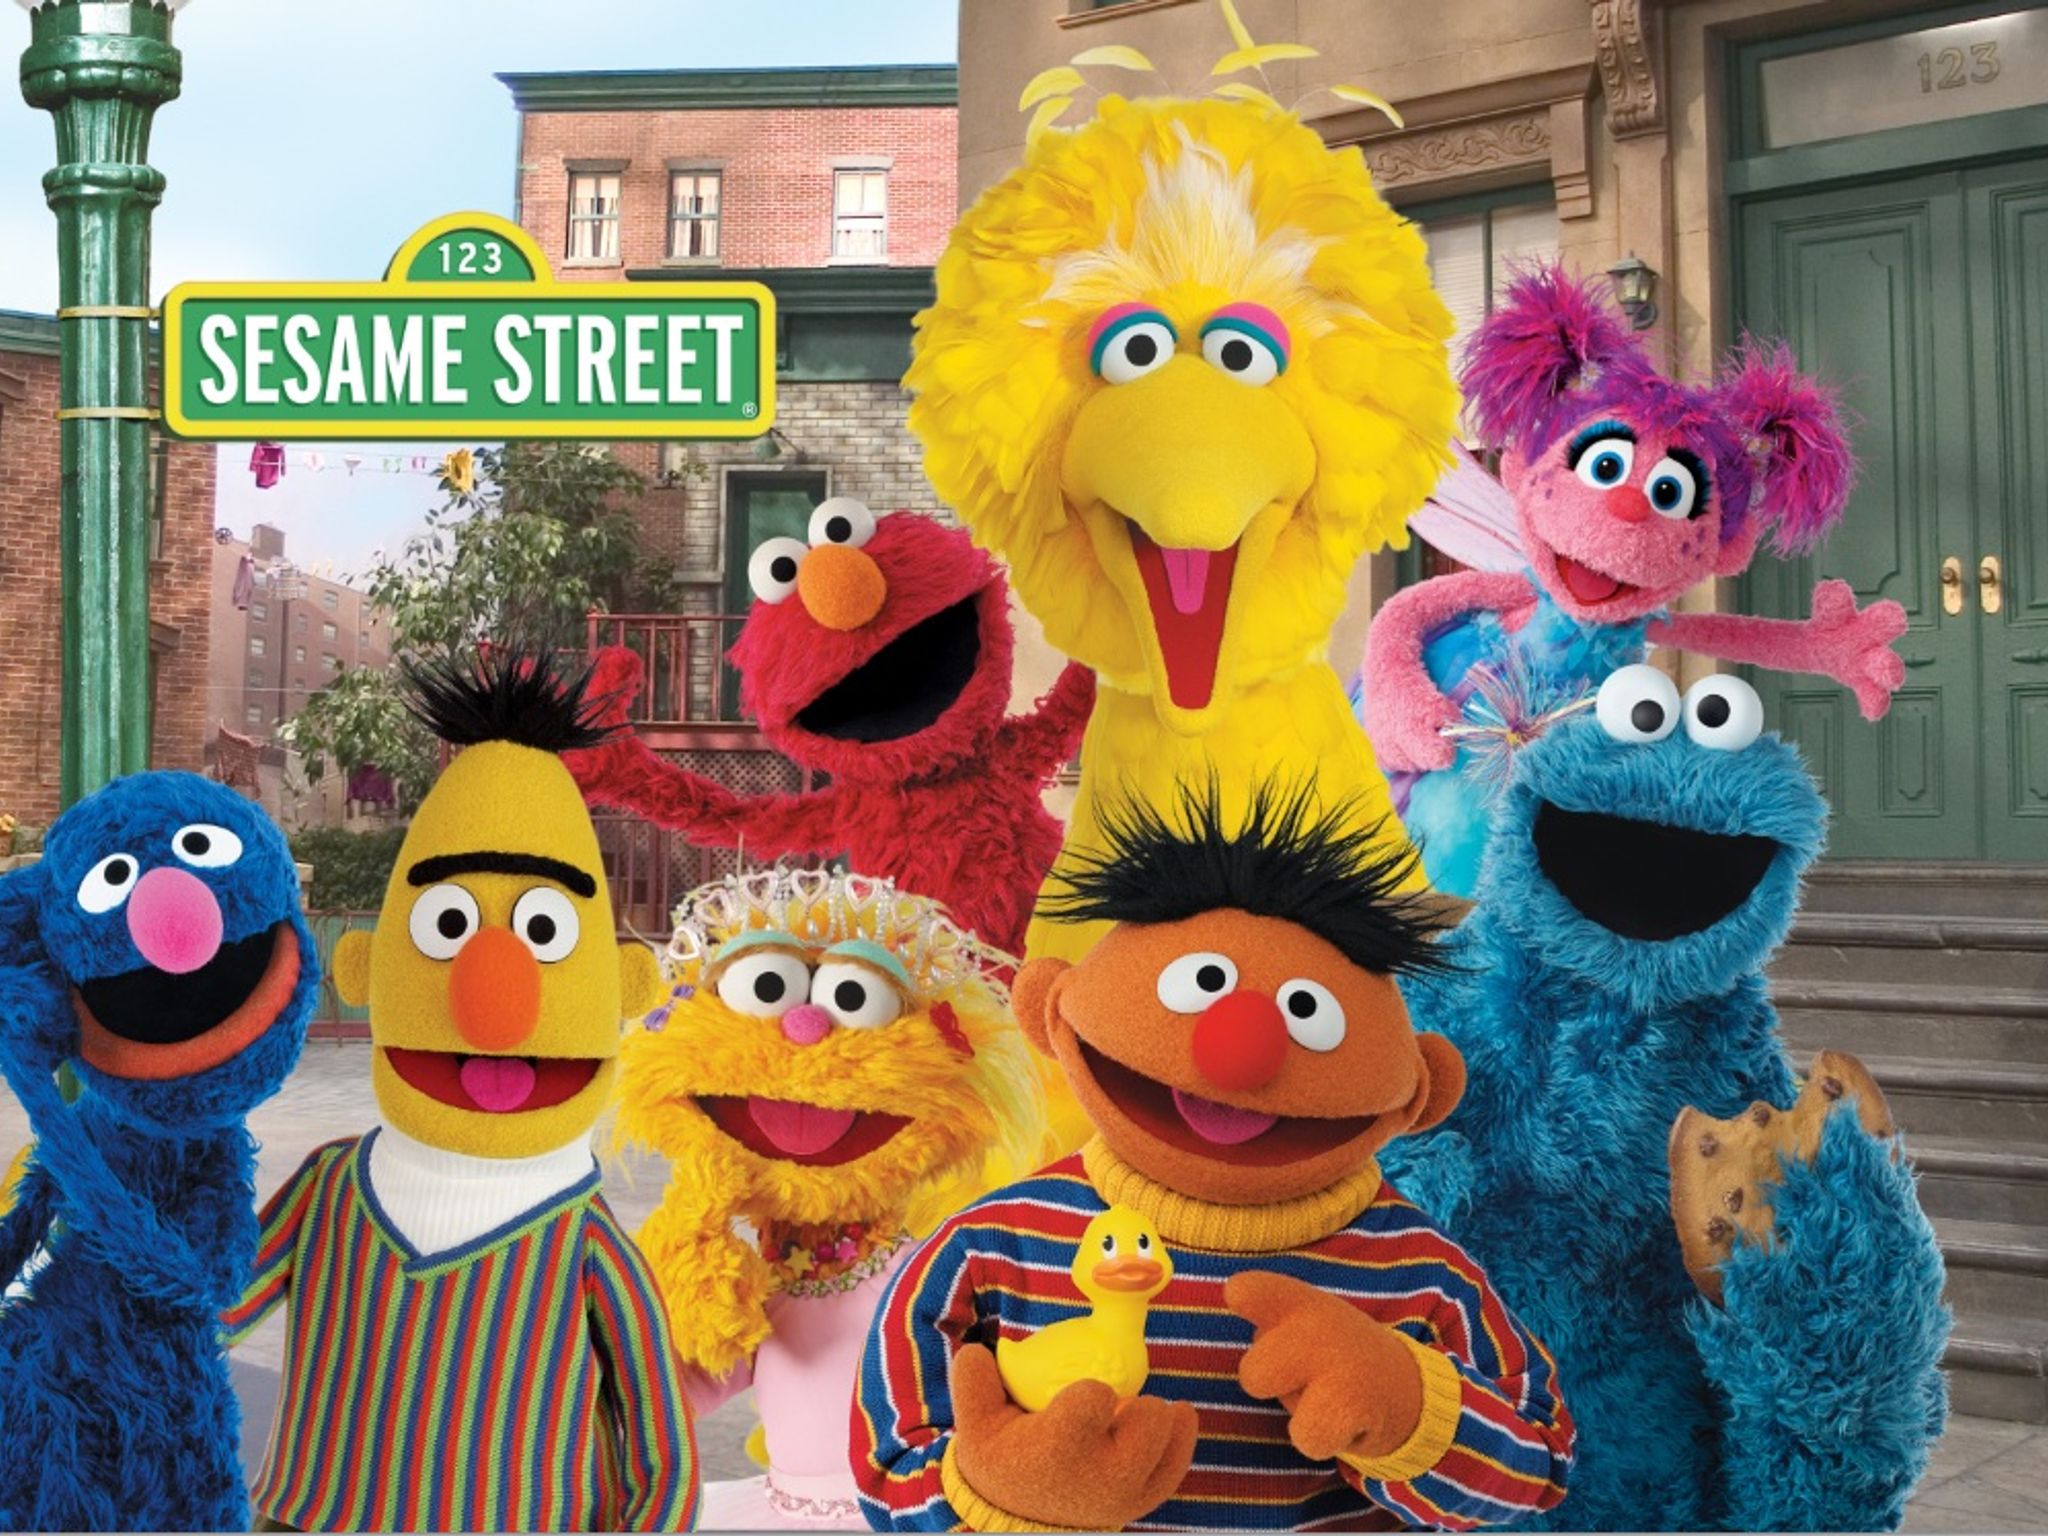 Sesame Street introduces new muppet Julia who has autism